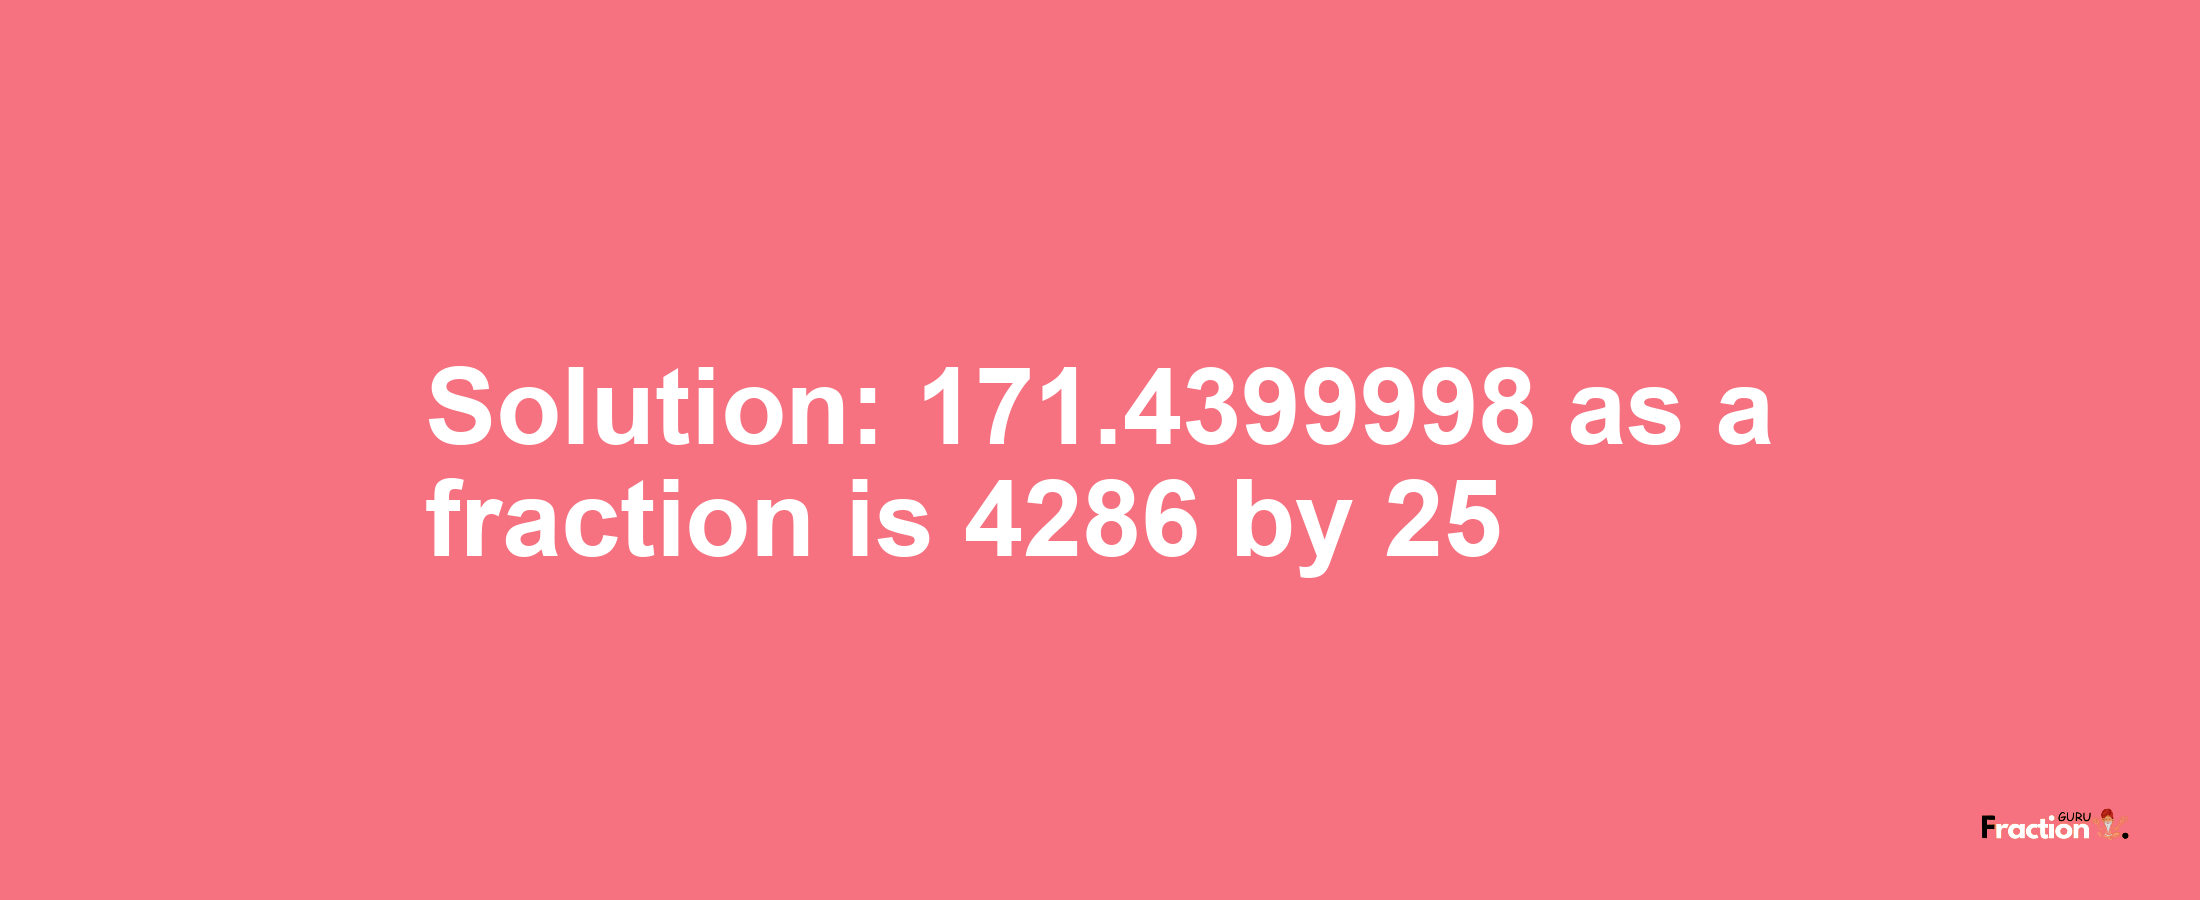 Solution:171.4399998 as a fraction is 4286/25